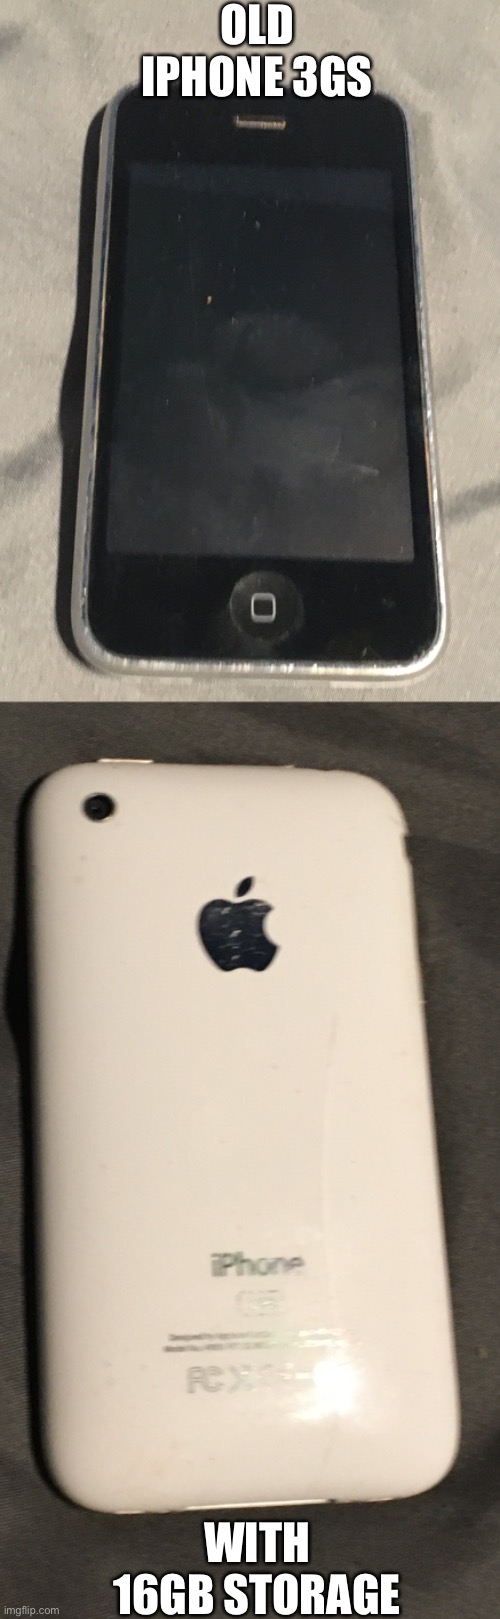 This old 16GB iPhone 3GS | OLD IPHONE 3GS; WITH 16GB STORAGE | image tagged in iphone,old phones | made w/ Imgflip meme maker